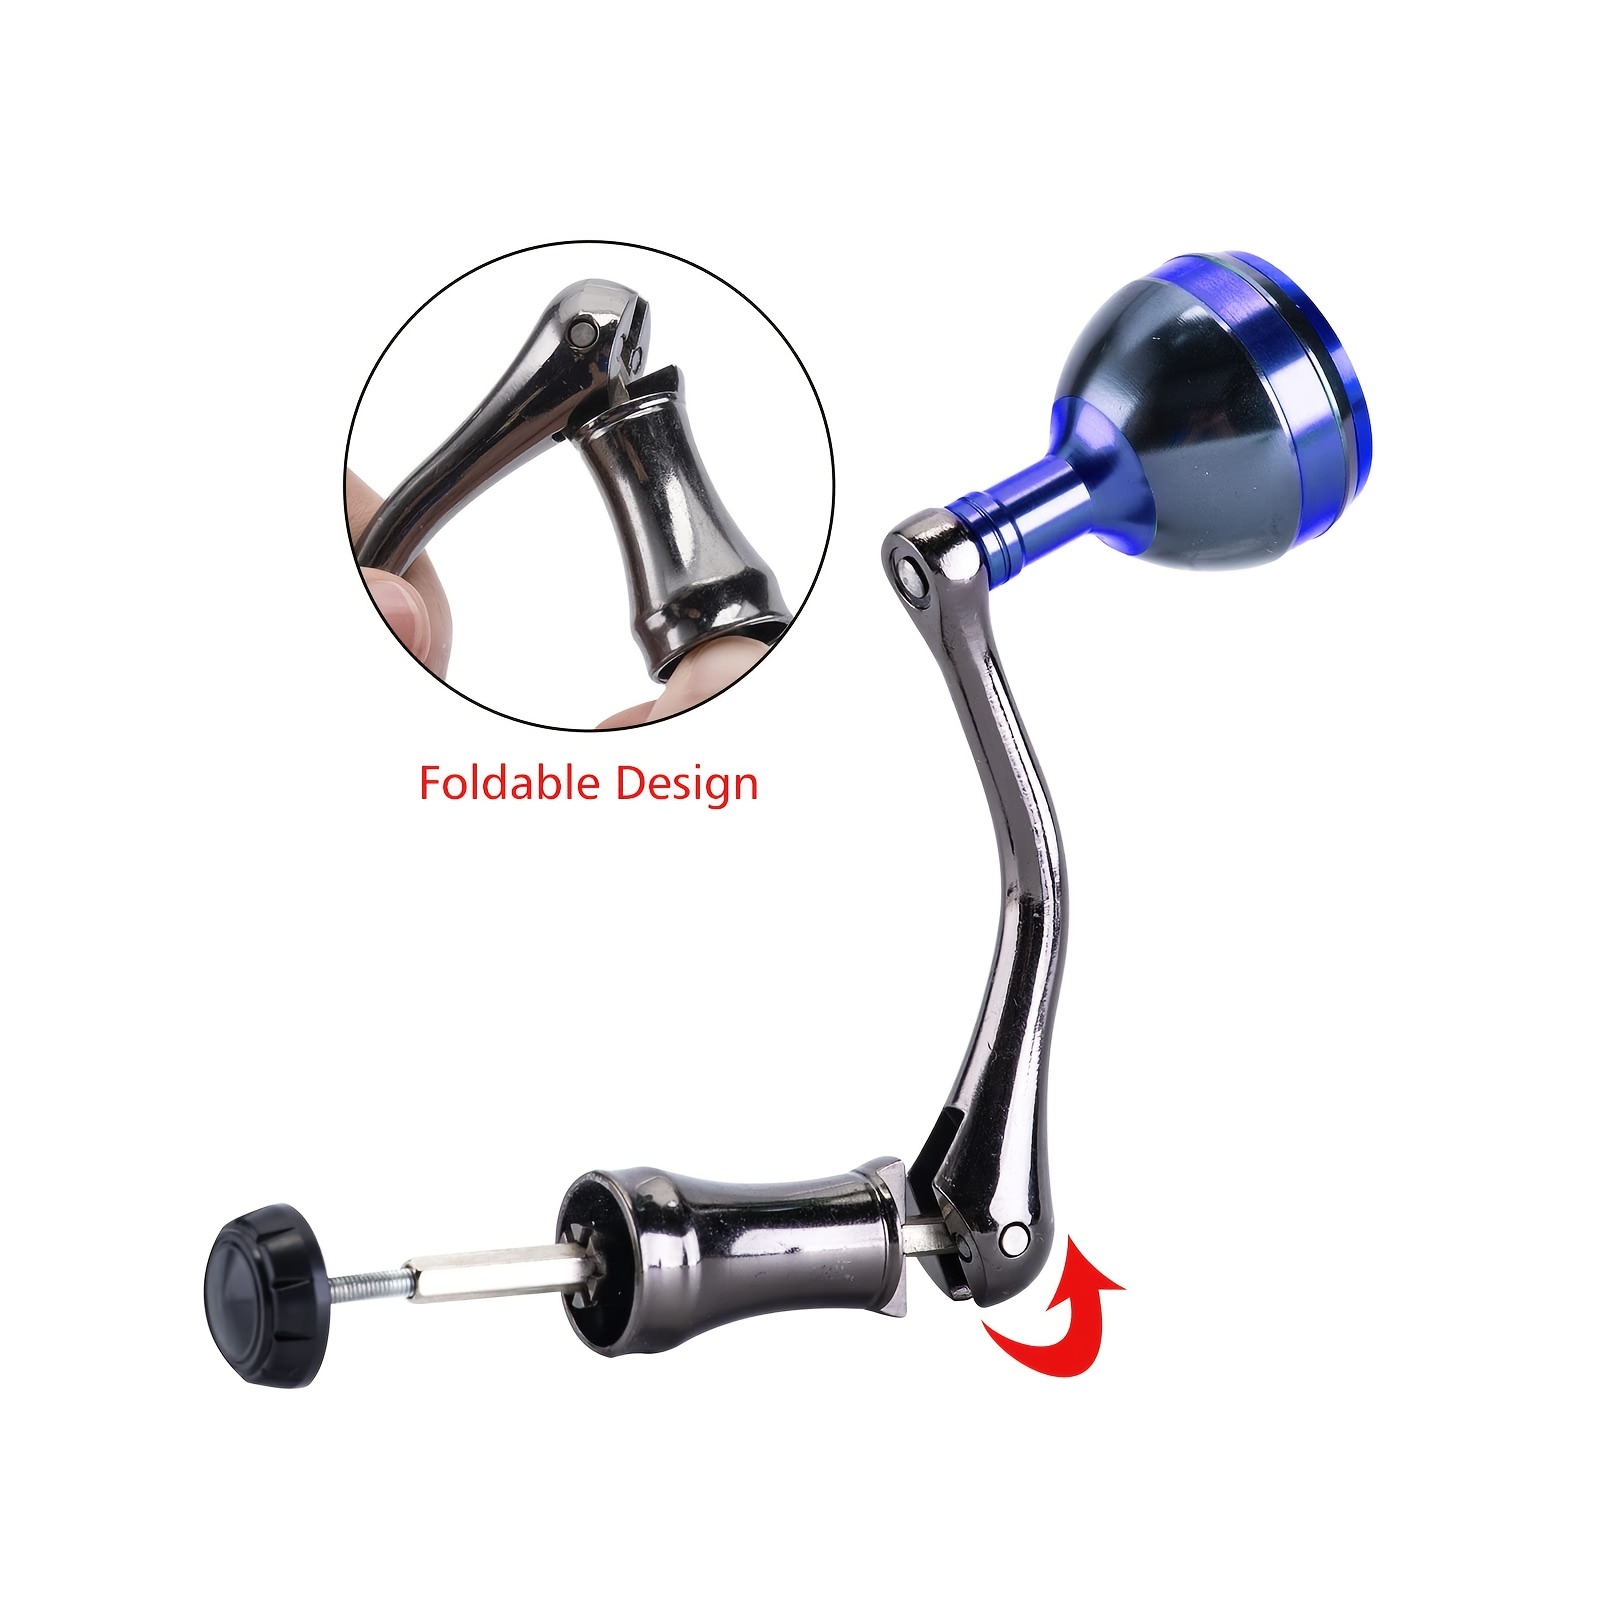 * Blue Spinning Reel Handle - Metal Replacement Handle with Round Power  Knob - Available in 3 Sizes (S/M/L) - Improved Grip and Control for Smoot